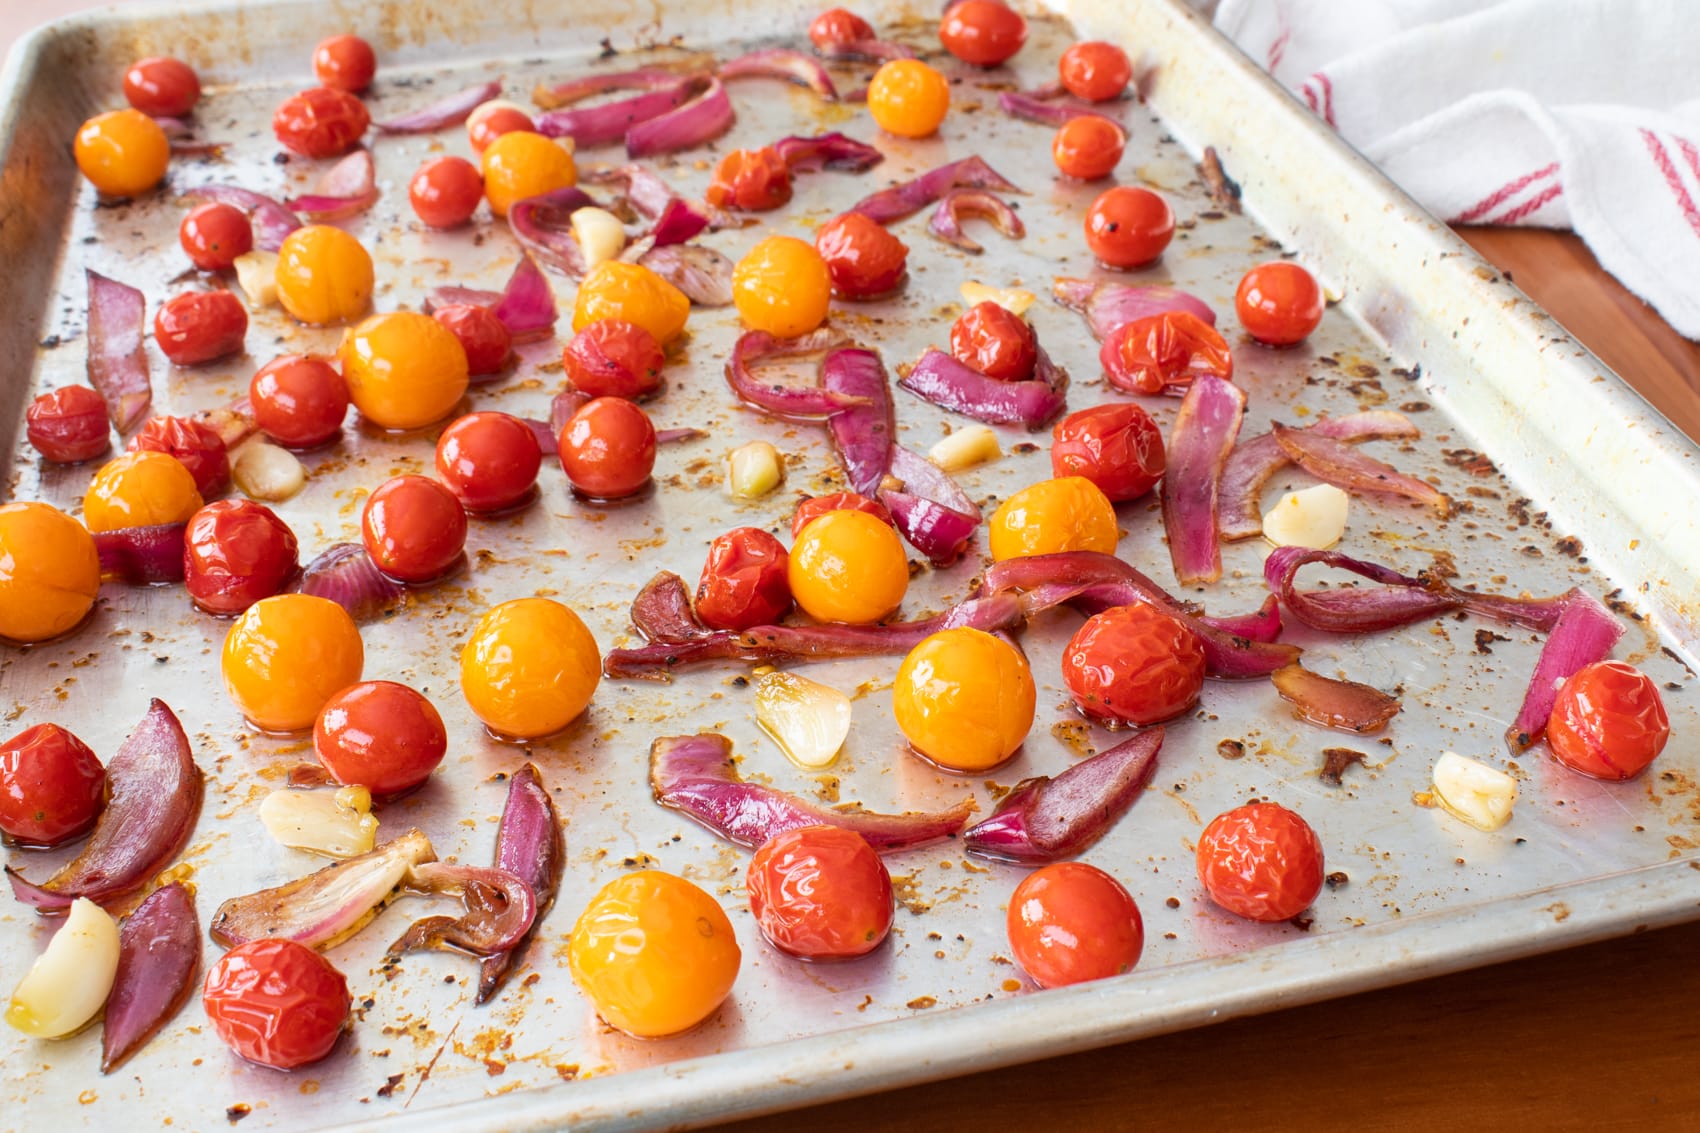 Balsamic-Roasted Red Onion and Cherry Tomato Pasta